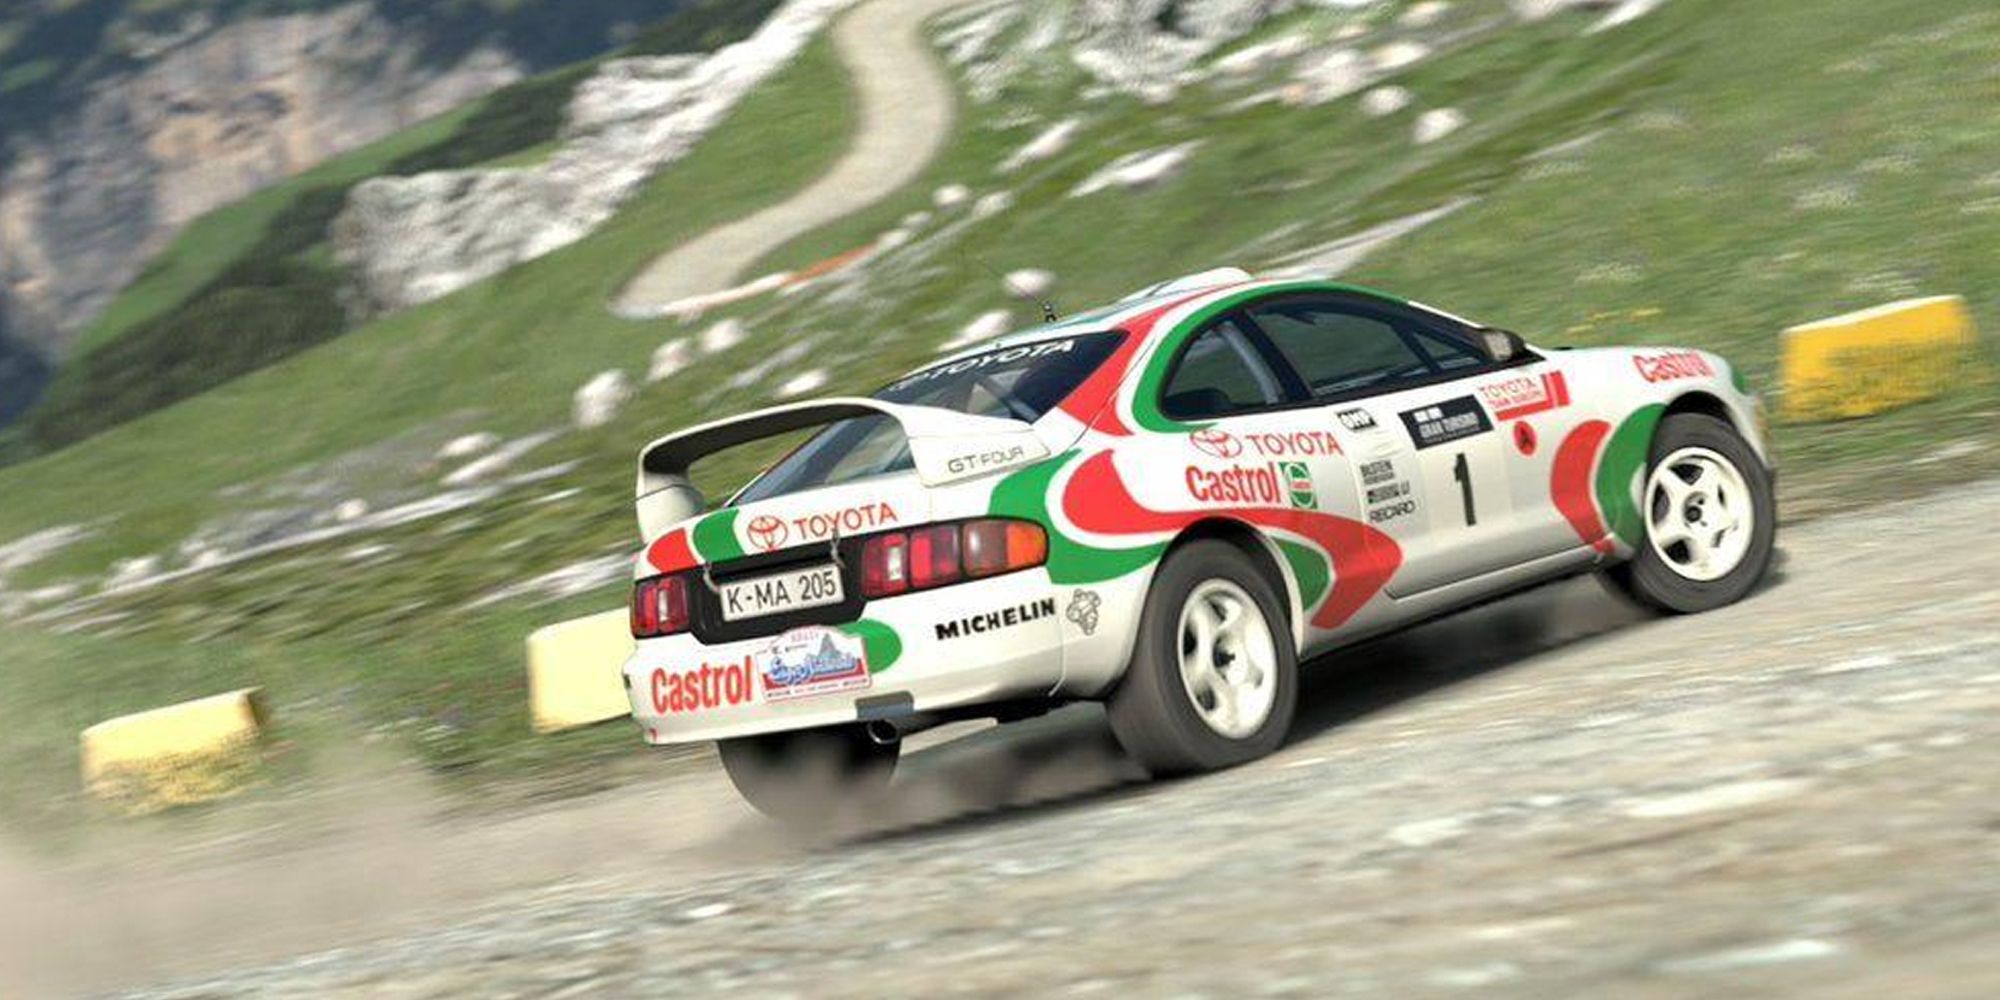 A Celica GT-Four in the iconic Castrol livery